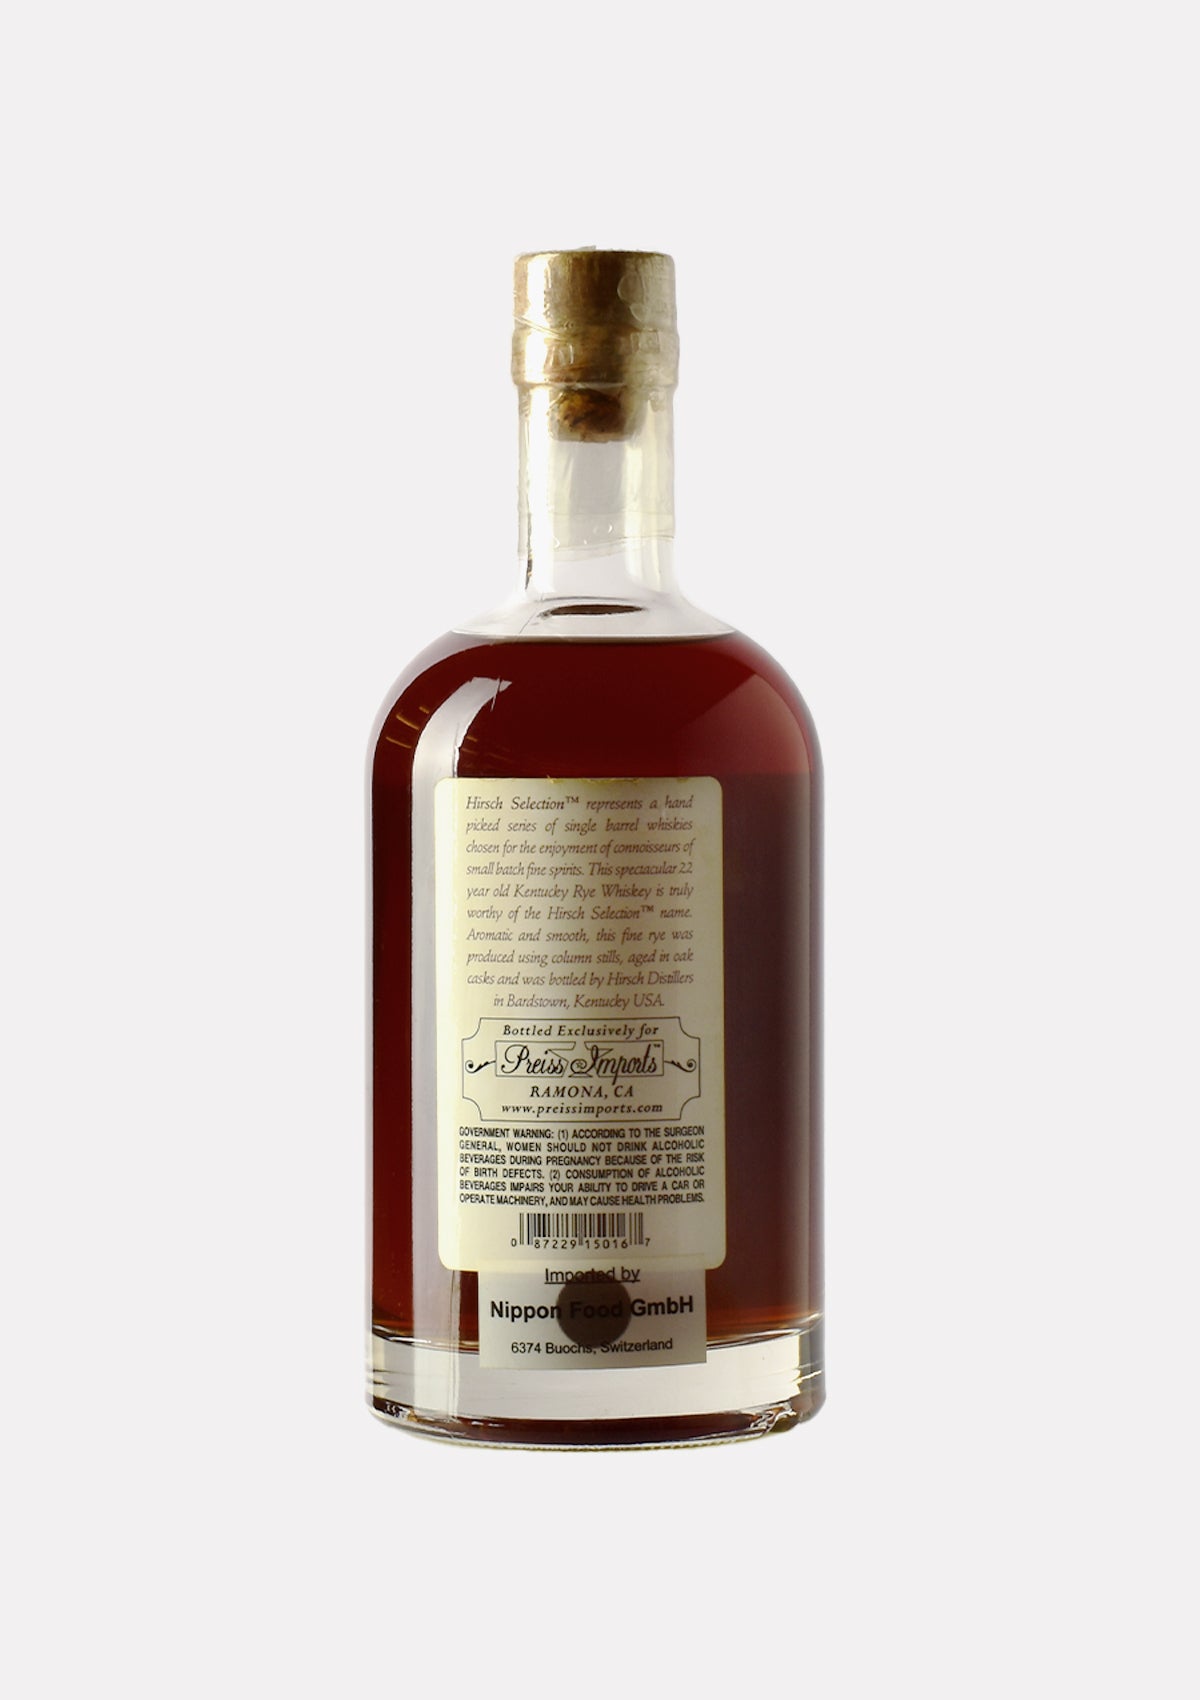 Hirsch Selection Kentucky Straight Rye Whiskey 22 Jahre